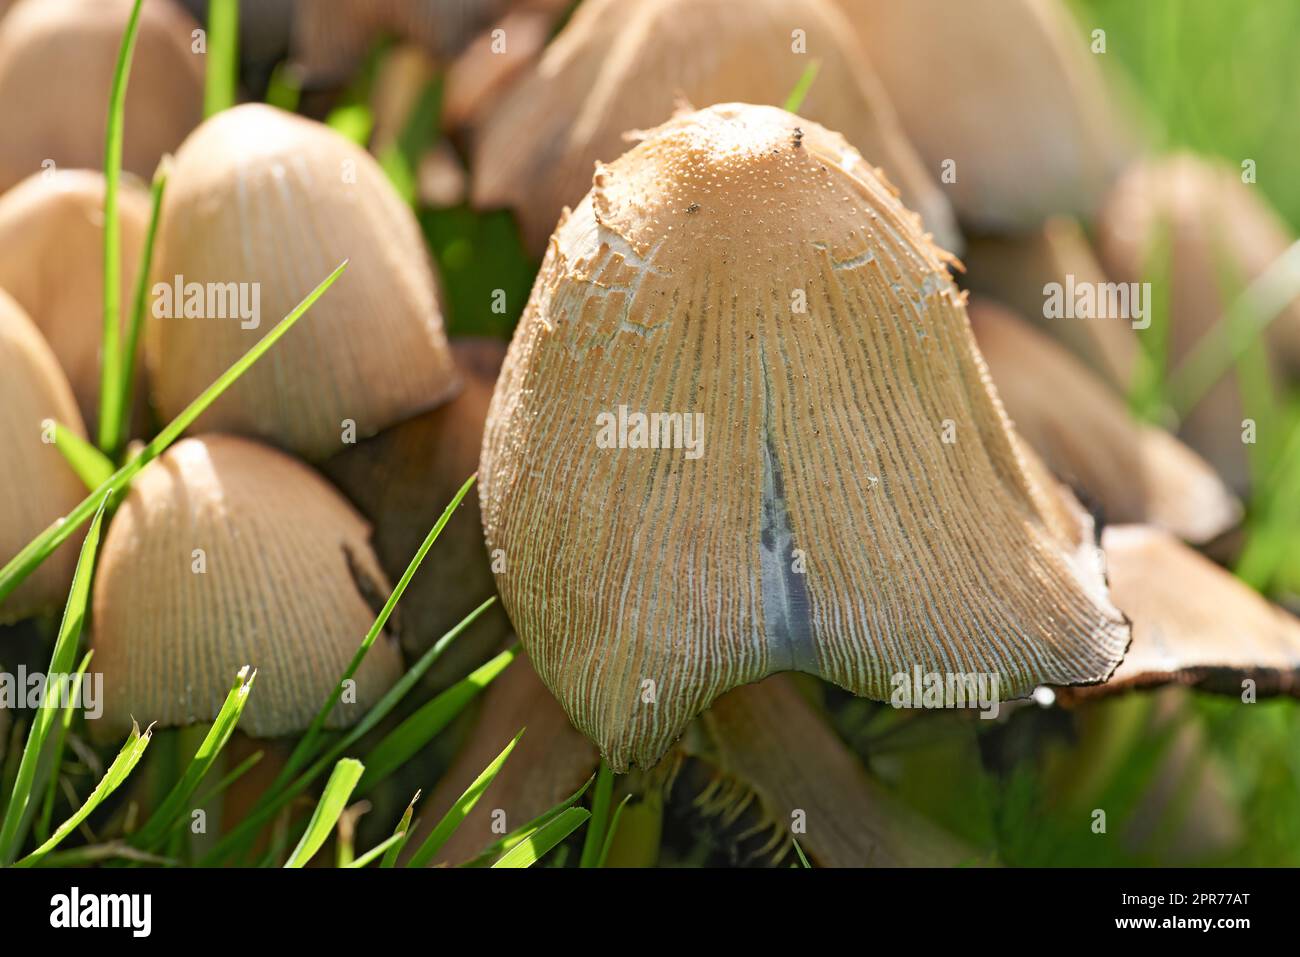 Closeup of mushroom caps growing on a field under the sunlight. Details of a fungi textures with tiny bugs or insect pests on the top. Group of wild edible mushrooms growing between lush green grass Stock Photo